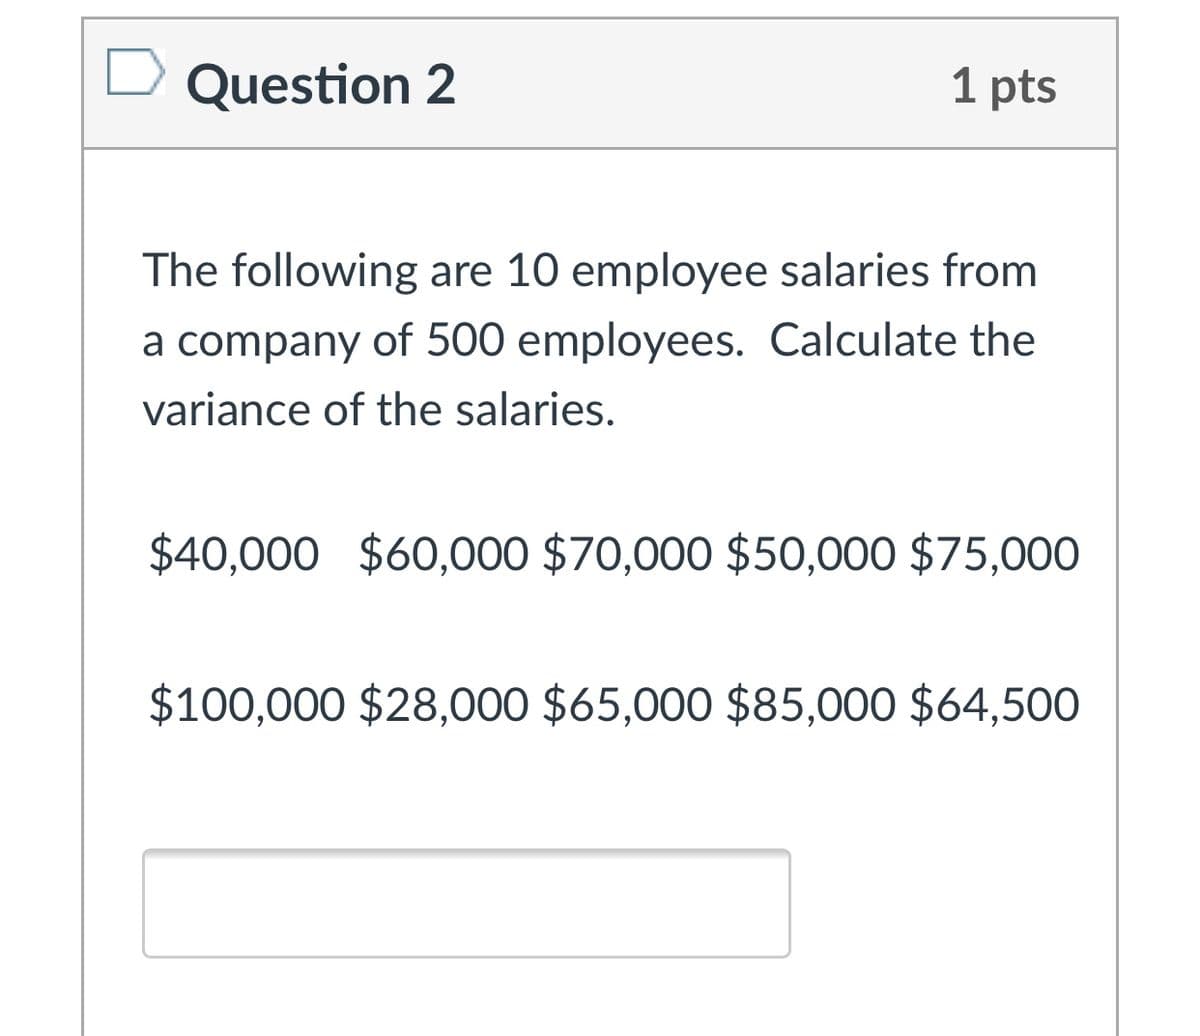 Question 2
1 pts
The following are 10 employee salaries from
a company of 500 employees. Calculate the
variance of the salaries.
$40,000 $60,000 $70,000 $50,000 $75,000
$100,000 $28,000 $65,000 $85,000 $64,500
